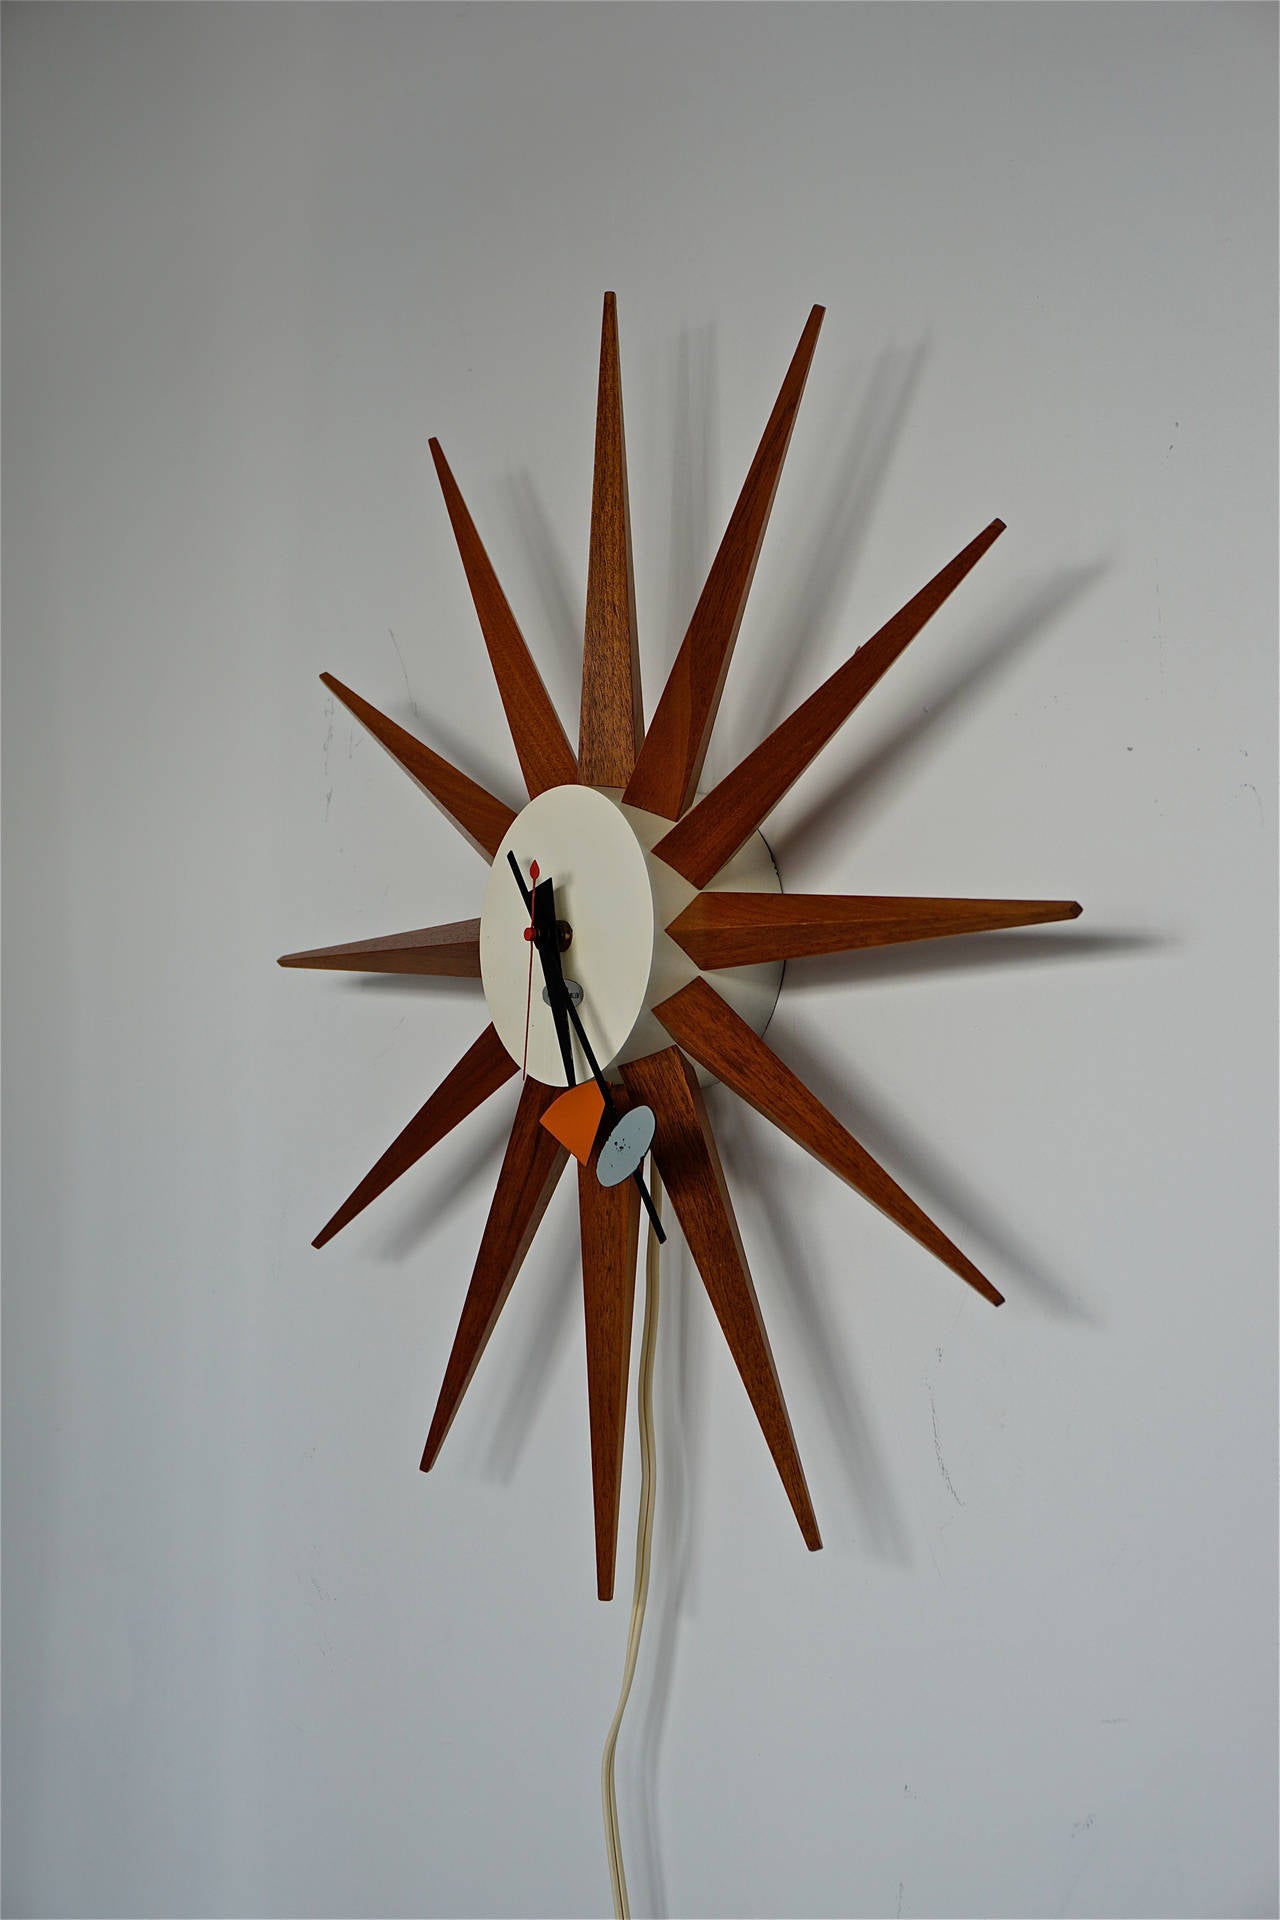 Designed by George Nelson and Associates for the Howard Miller Clock Co.
Part of a collection of vintage Nelson clocks studio one 11 will be offering on 1stdibs.
Walnut spokes, painted metal body, enameled metal hands.
Rewired and runs perfectly.